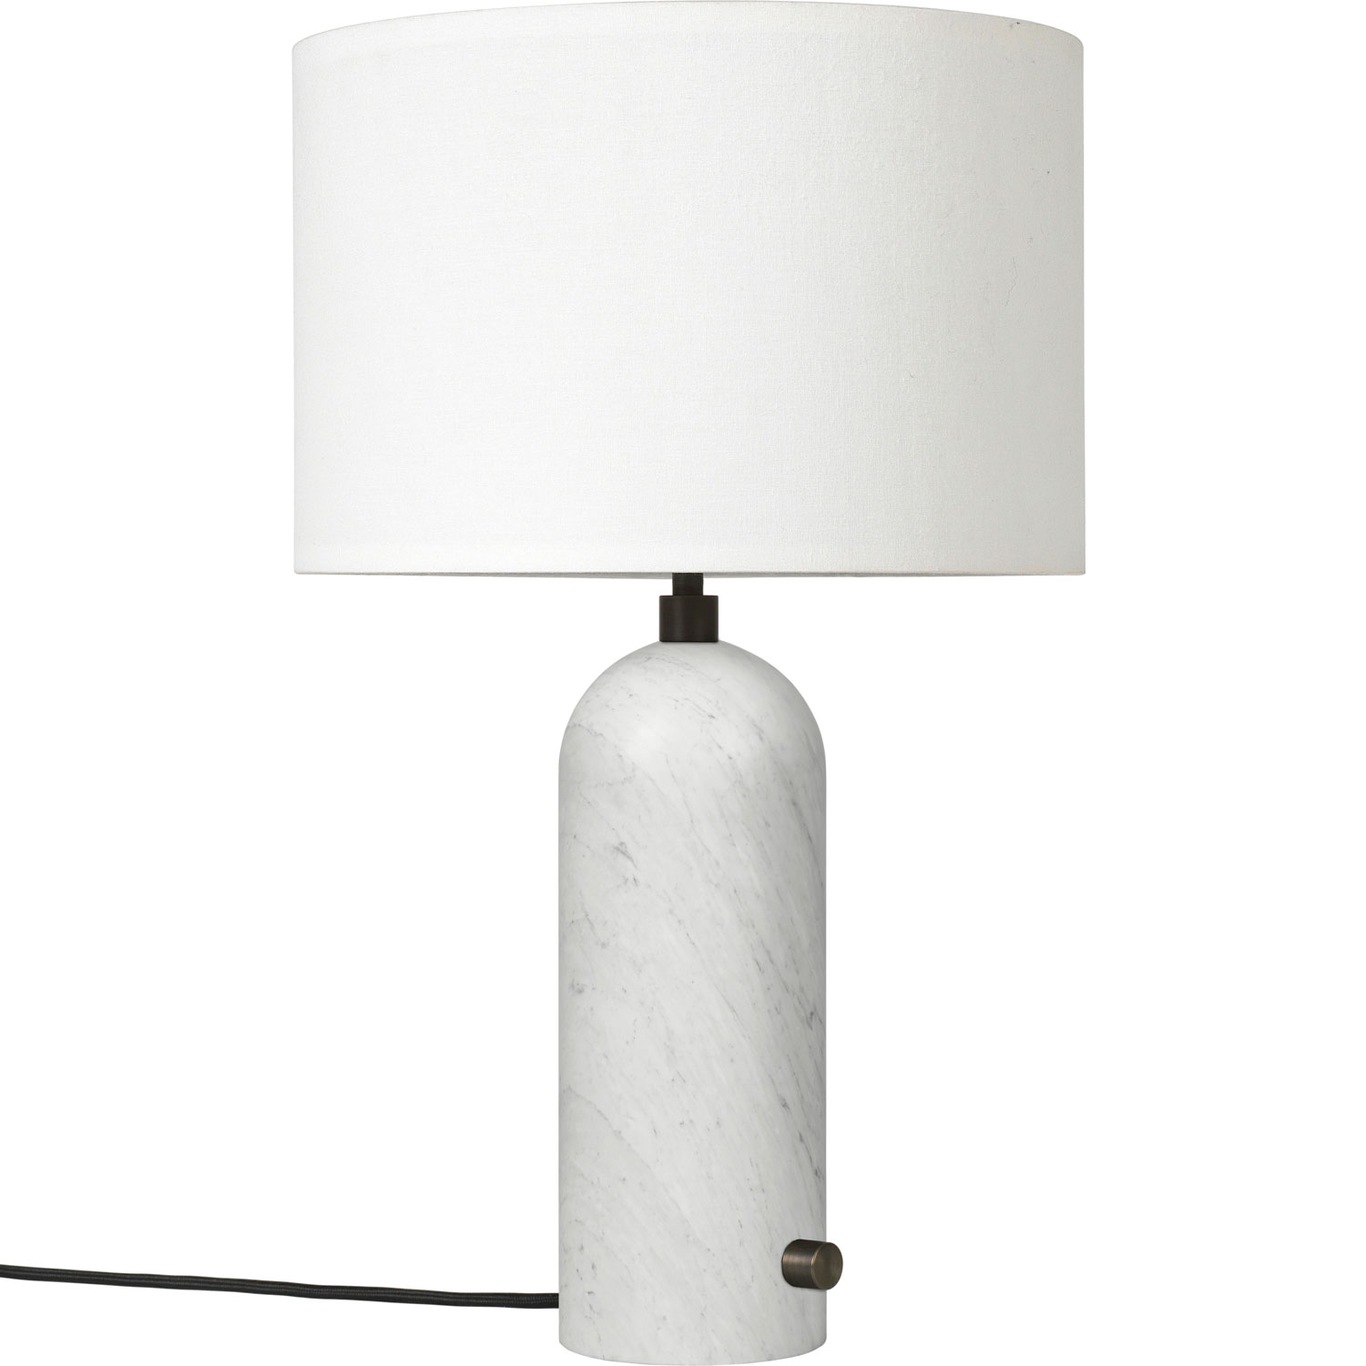 Gravity Table Lamp Small, White Marble / White